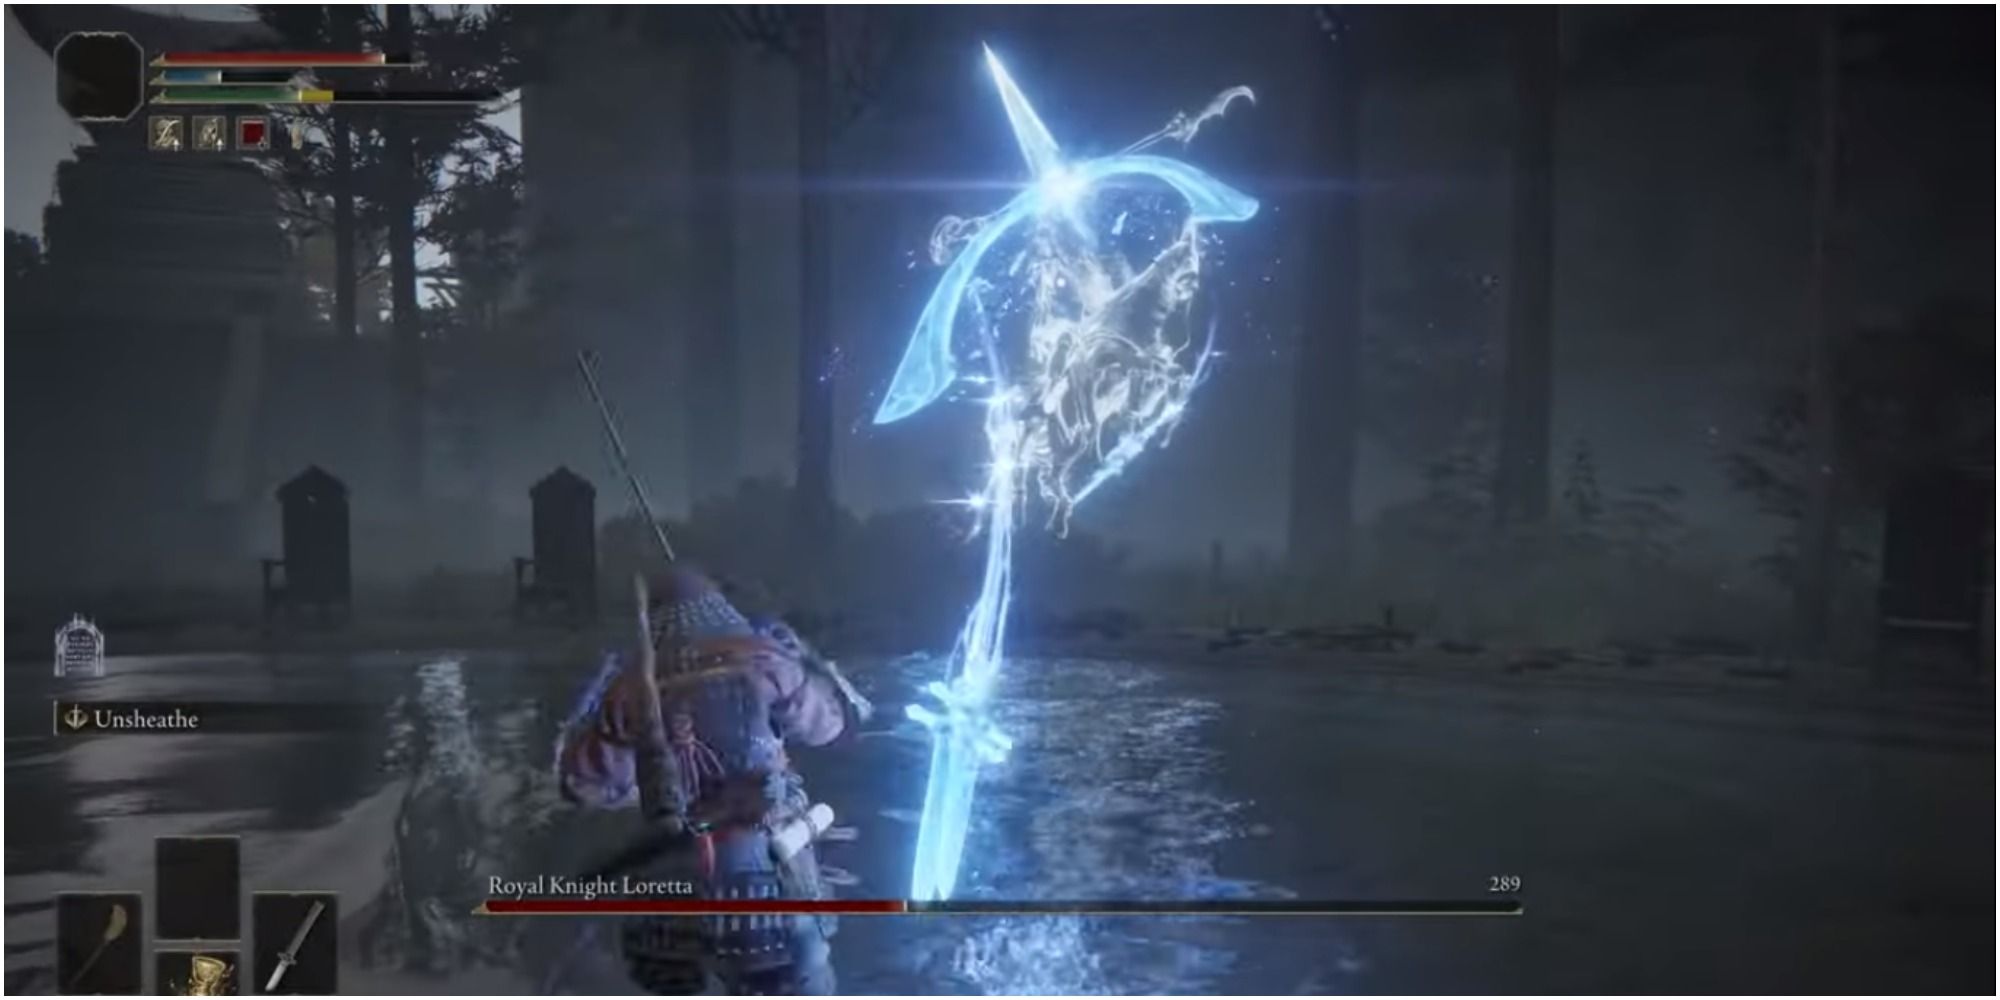 The boss using a magic greatbow to attack the player.